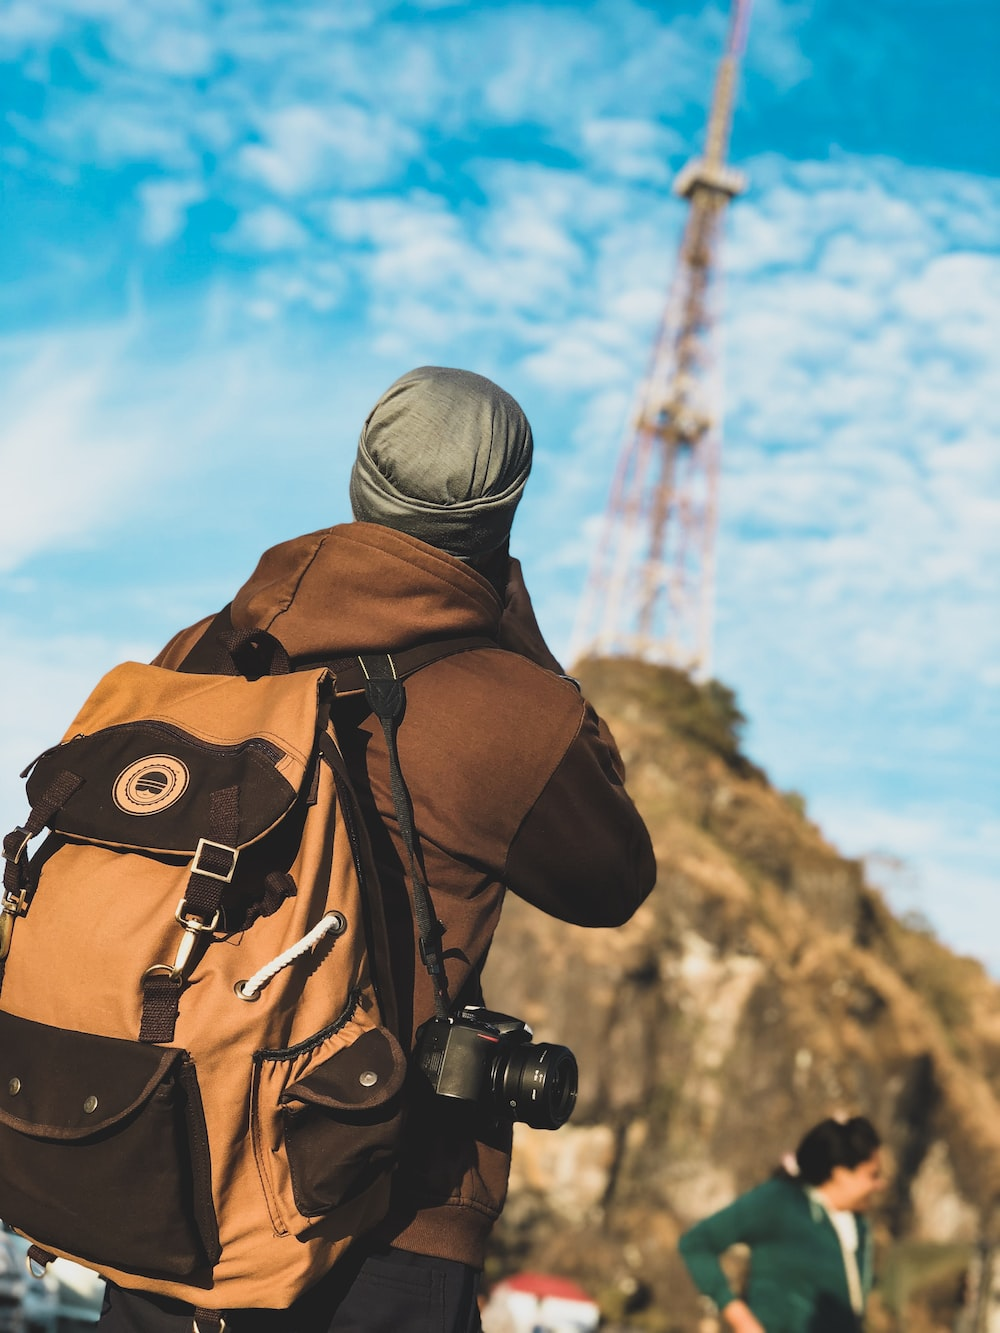 A man on his first backpacking trip stands in front of a tower, carrying his trusty backpack.